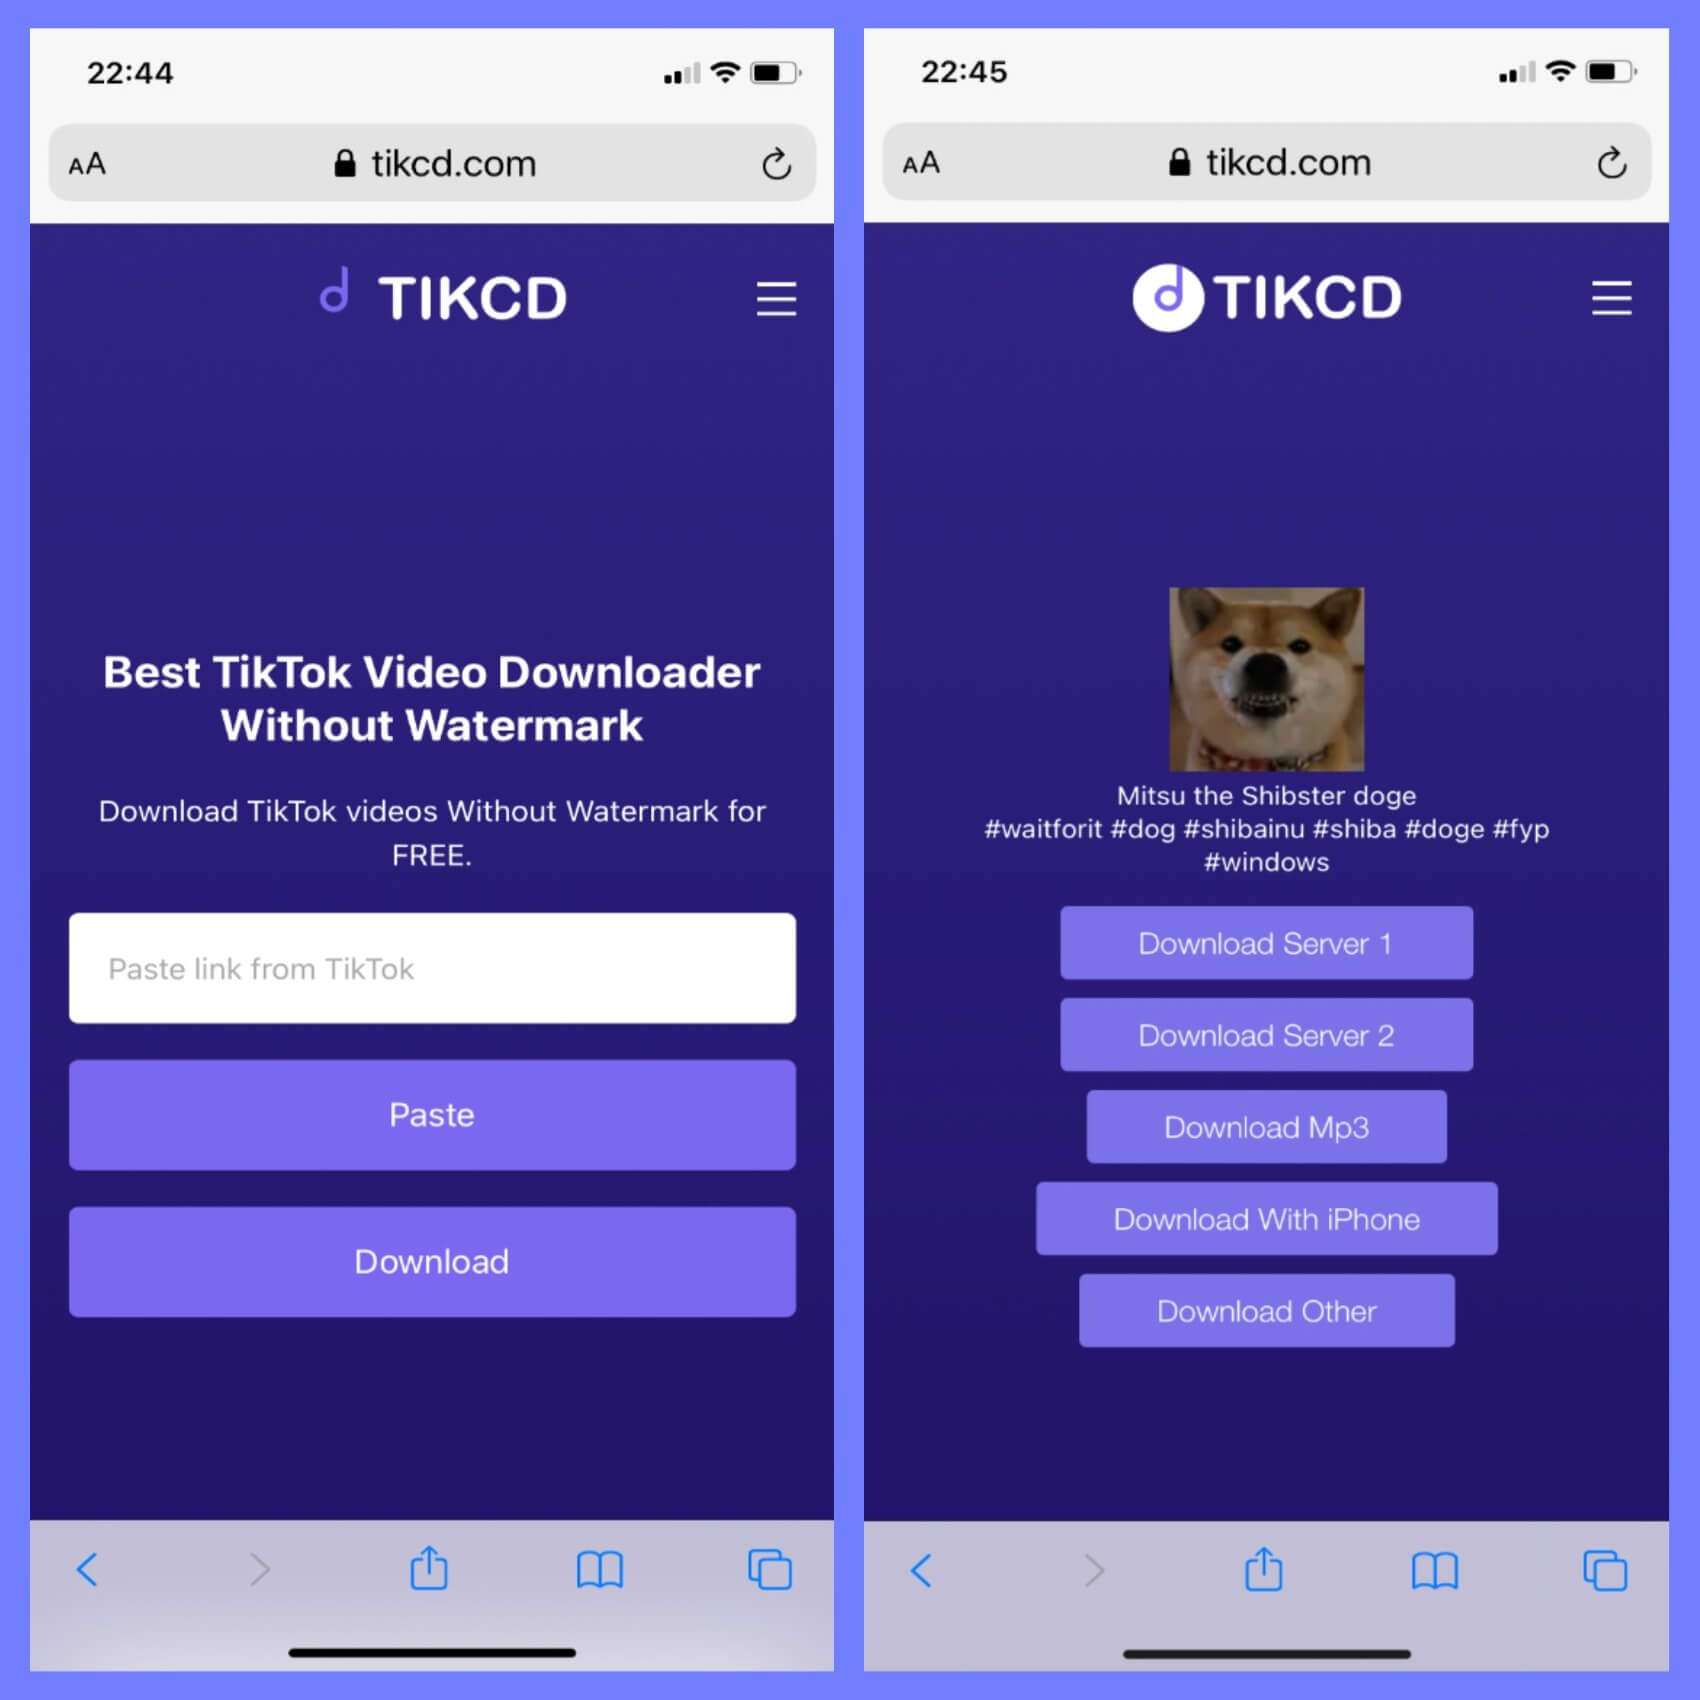 Download TikTok Video to iPhone Camera Roll with No Watermark with TIKCD